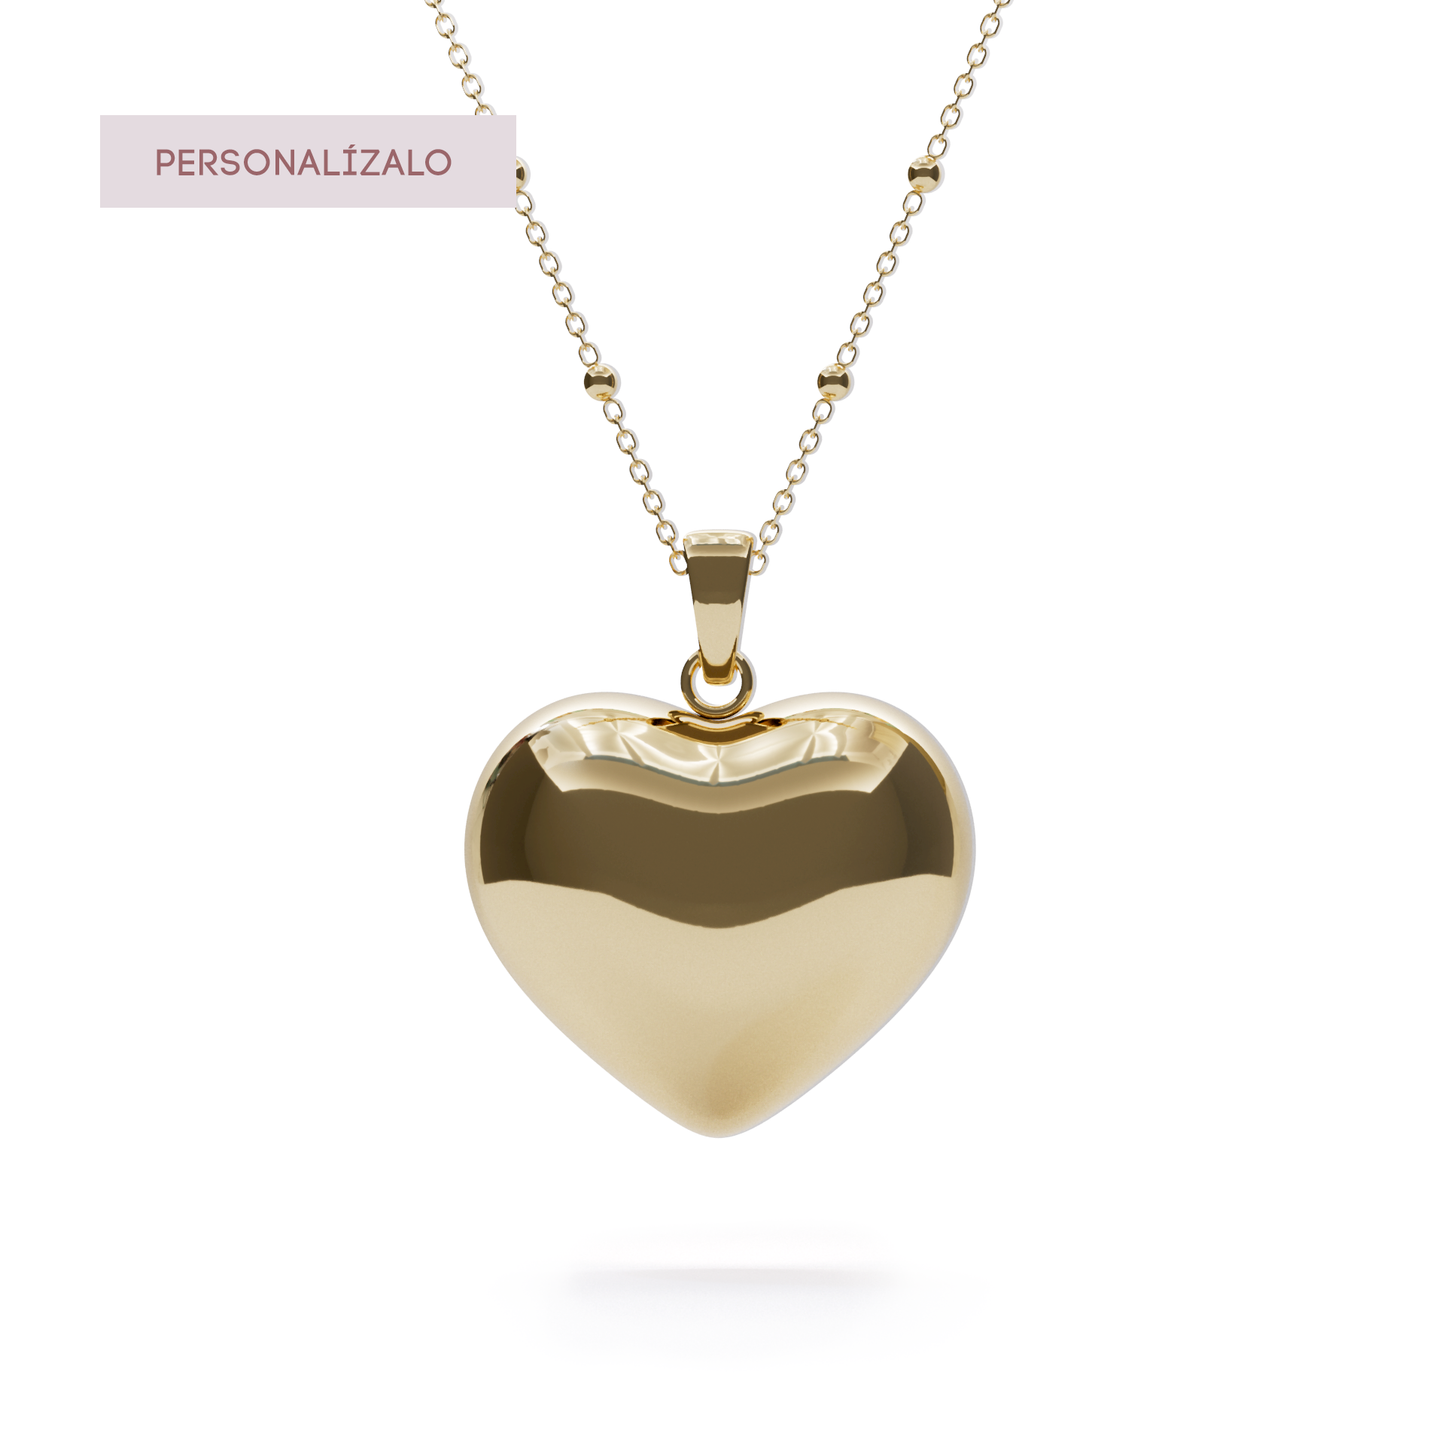 Heart Locket Charm Necklace - Yellow Gold